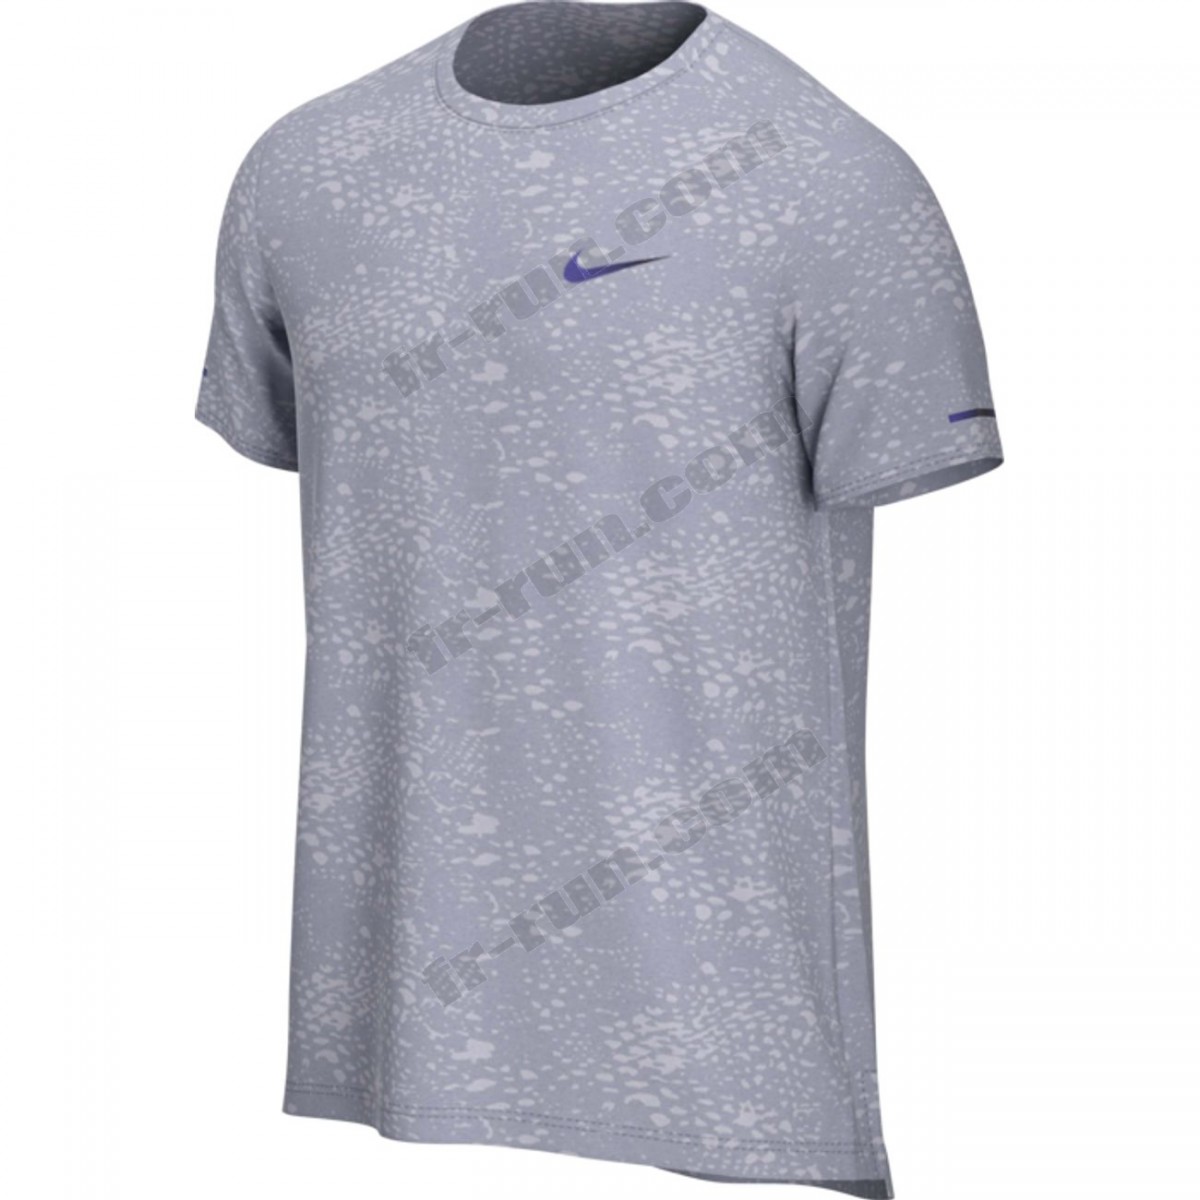 Nike/TOP running homme NIKE RN DVN DF MILER SS EMBSS √ Nouveau style √ Soldes - Nike/TOP running homme NIKE RN DVN DF MILER SS EMBSS √ Nouveau style √ Soldes